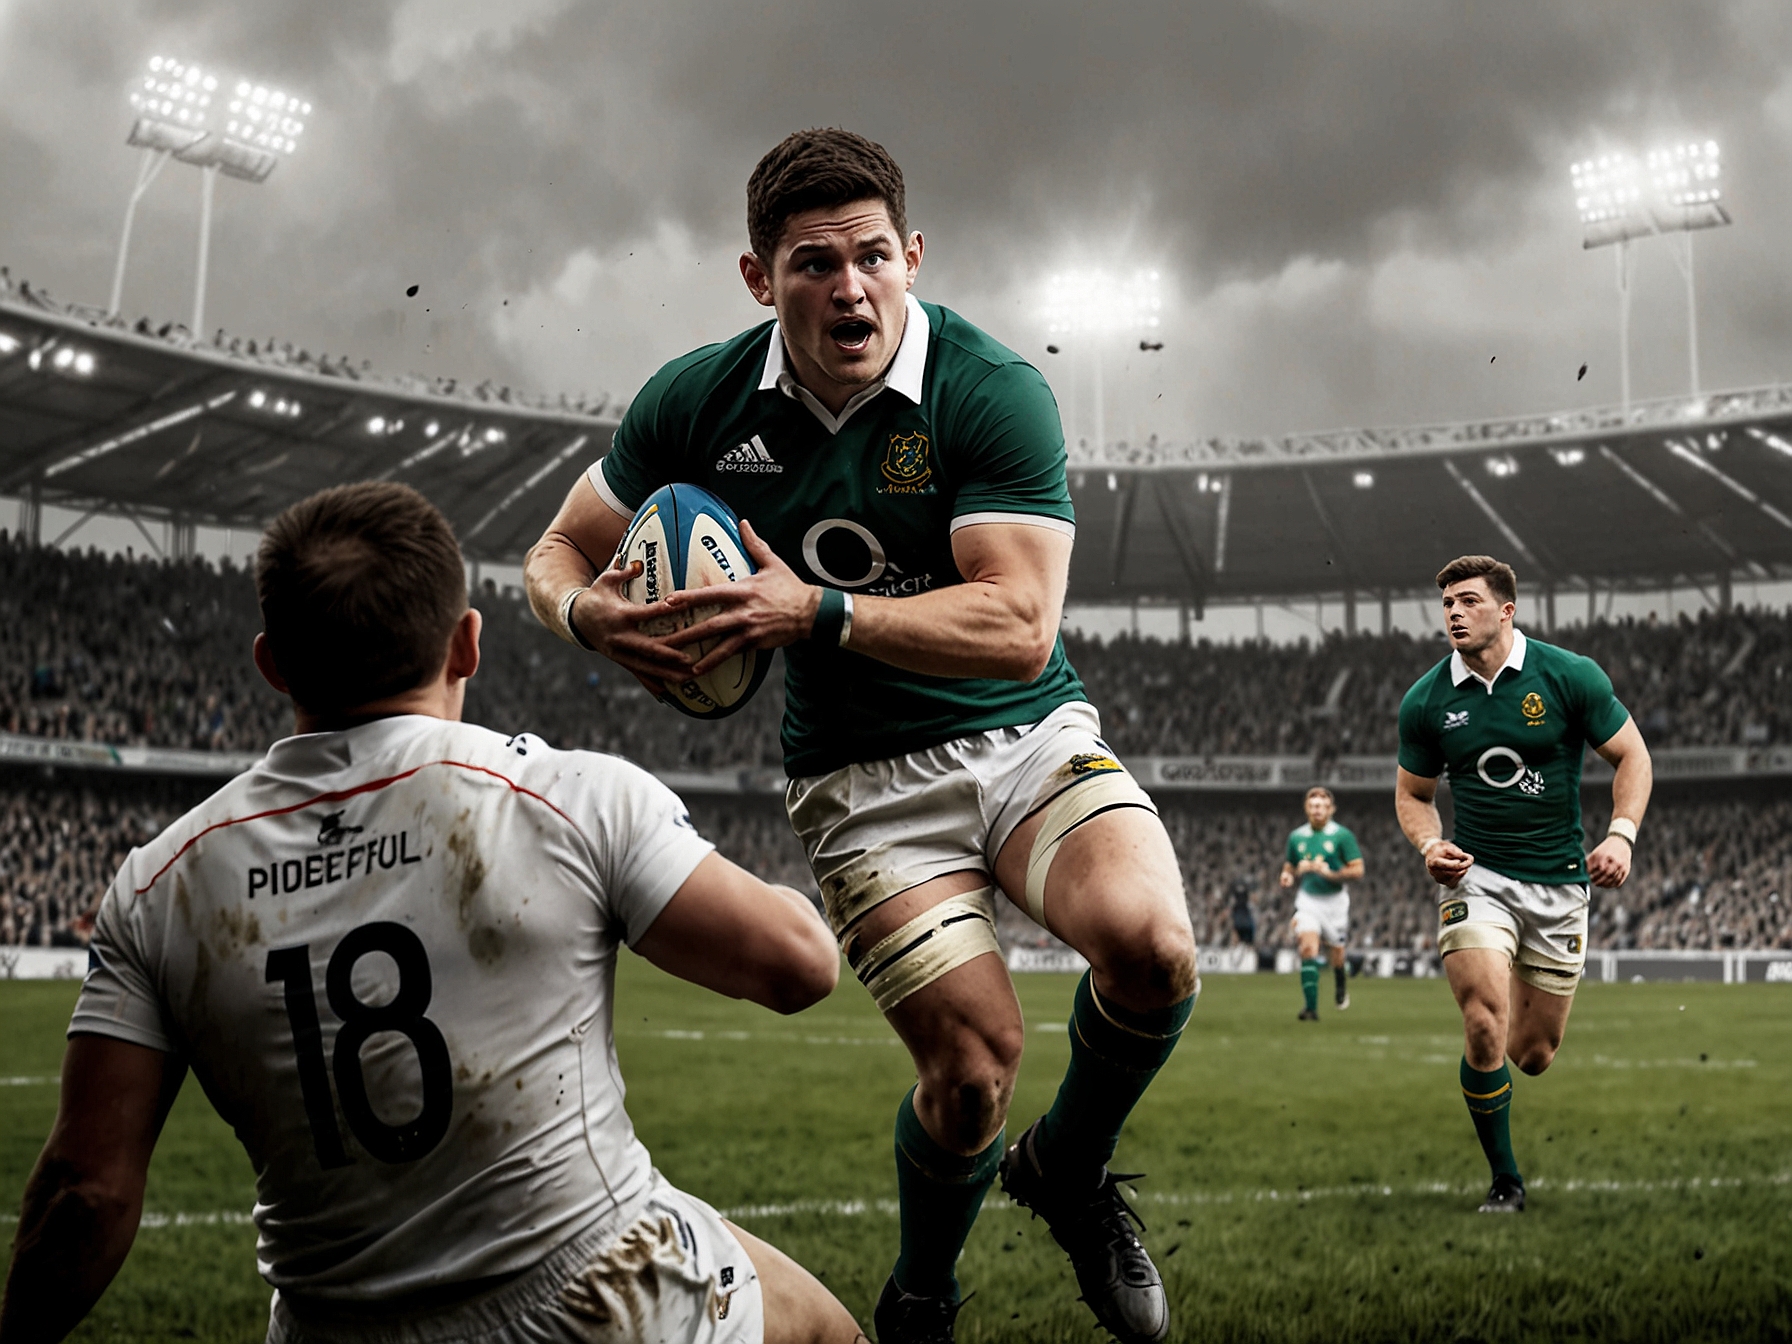 Image of Jack O’Donoghue in action during a rugby match, showcasing his tackling skills and defensive presence, which have impressed national team coach Andy Farrell.